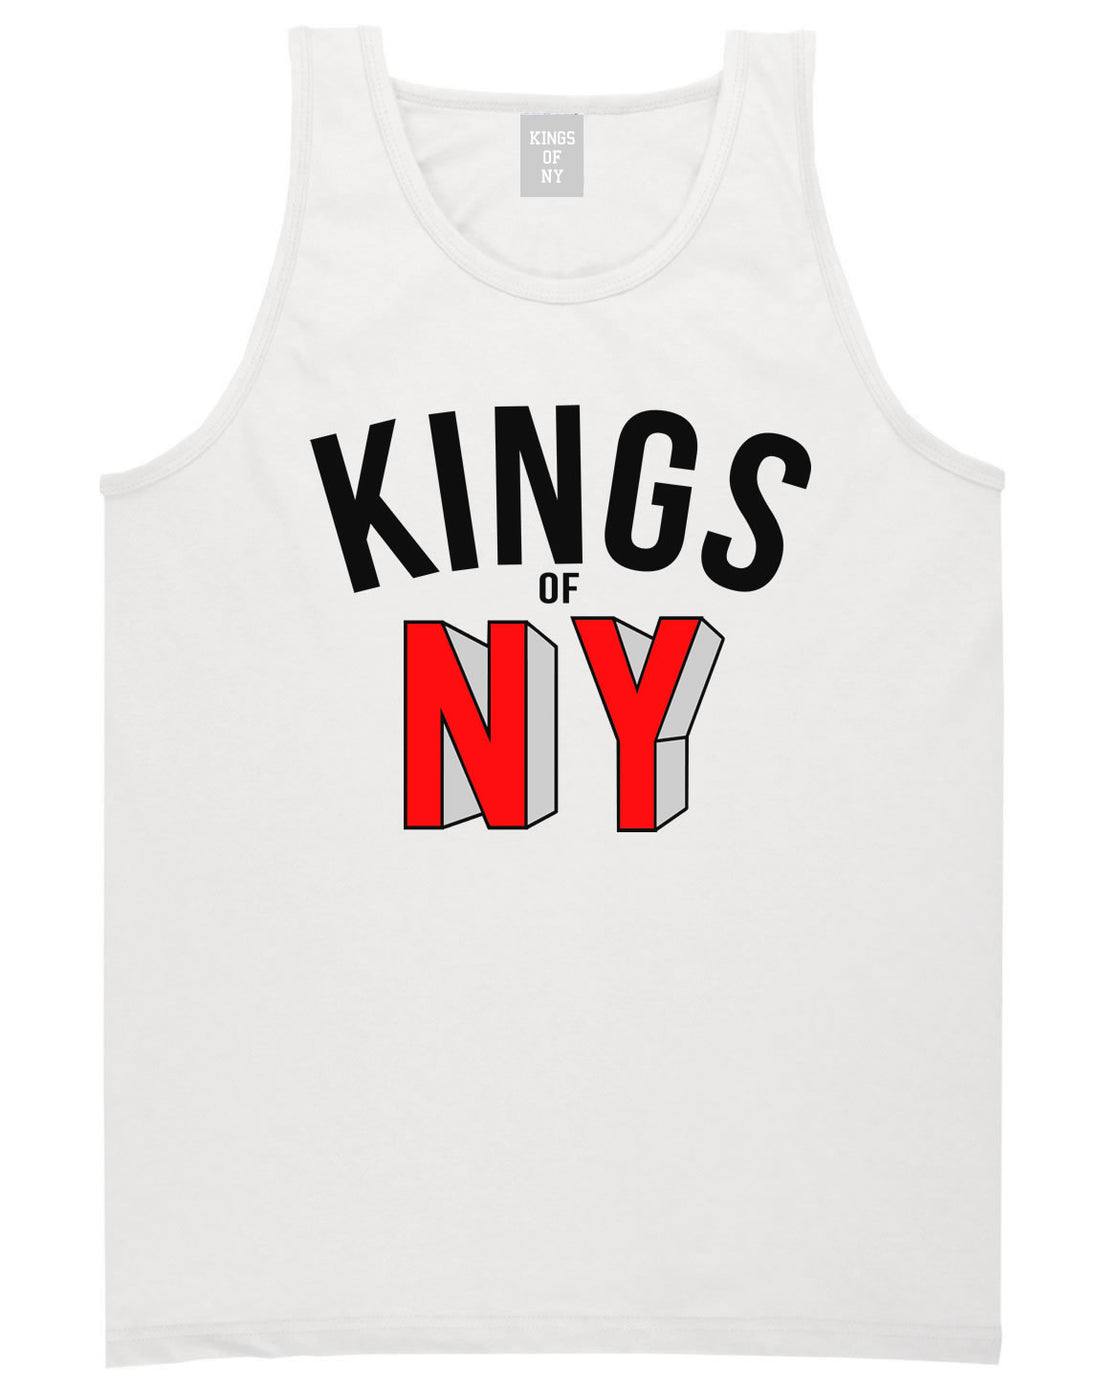 NY Red Block Letter Printed Tank Top in White by Kings Of NY